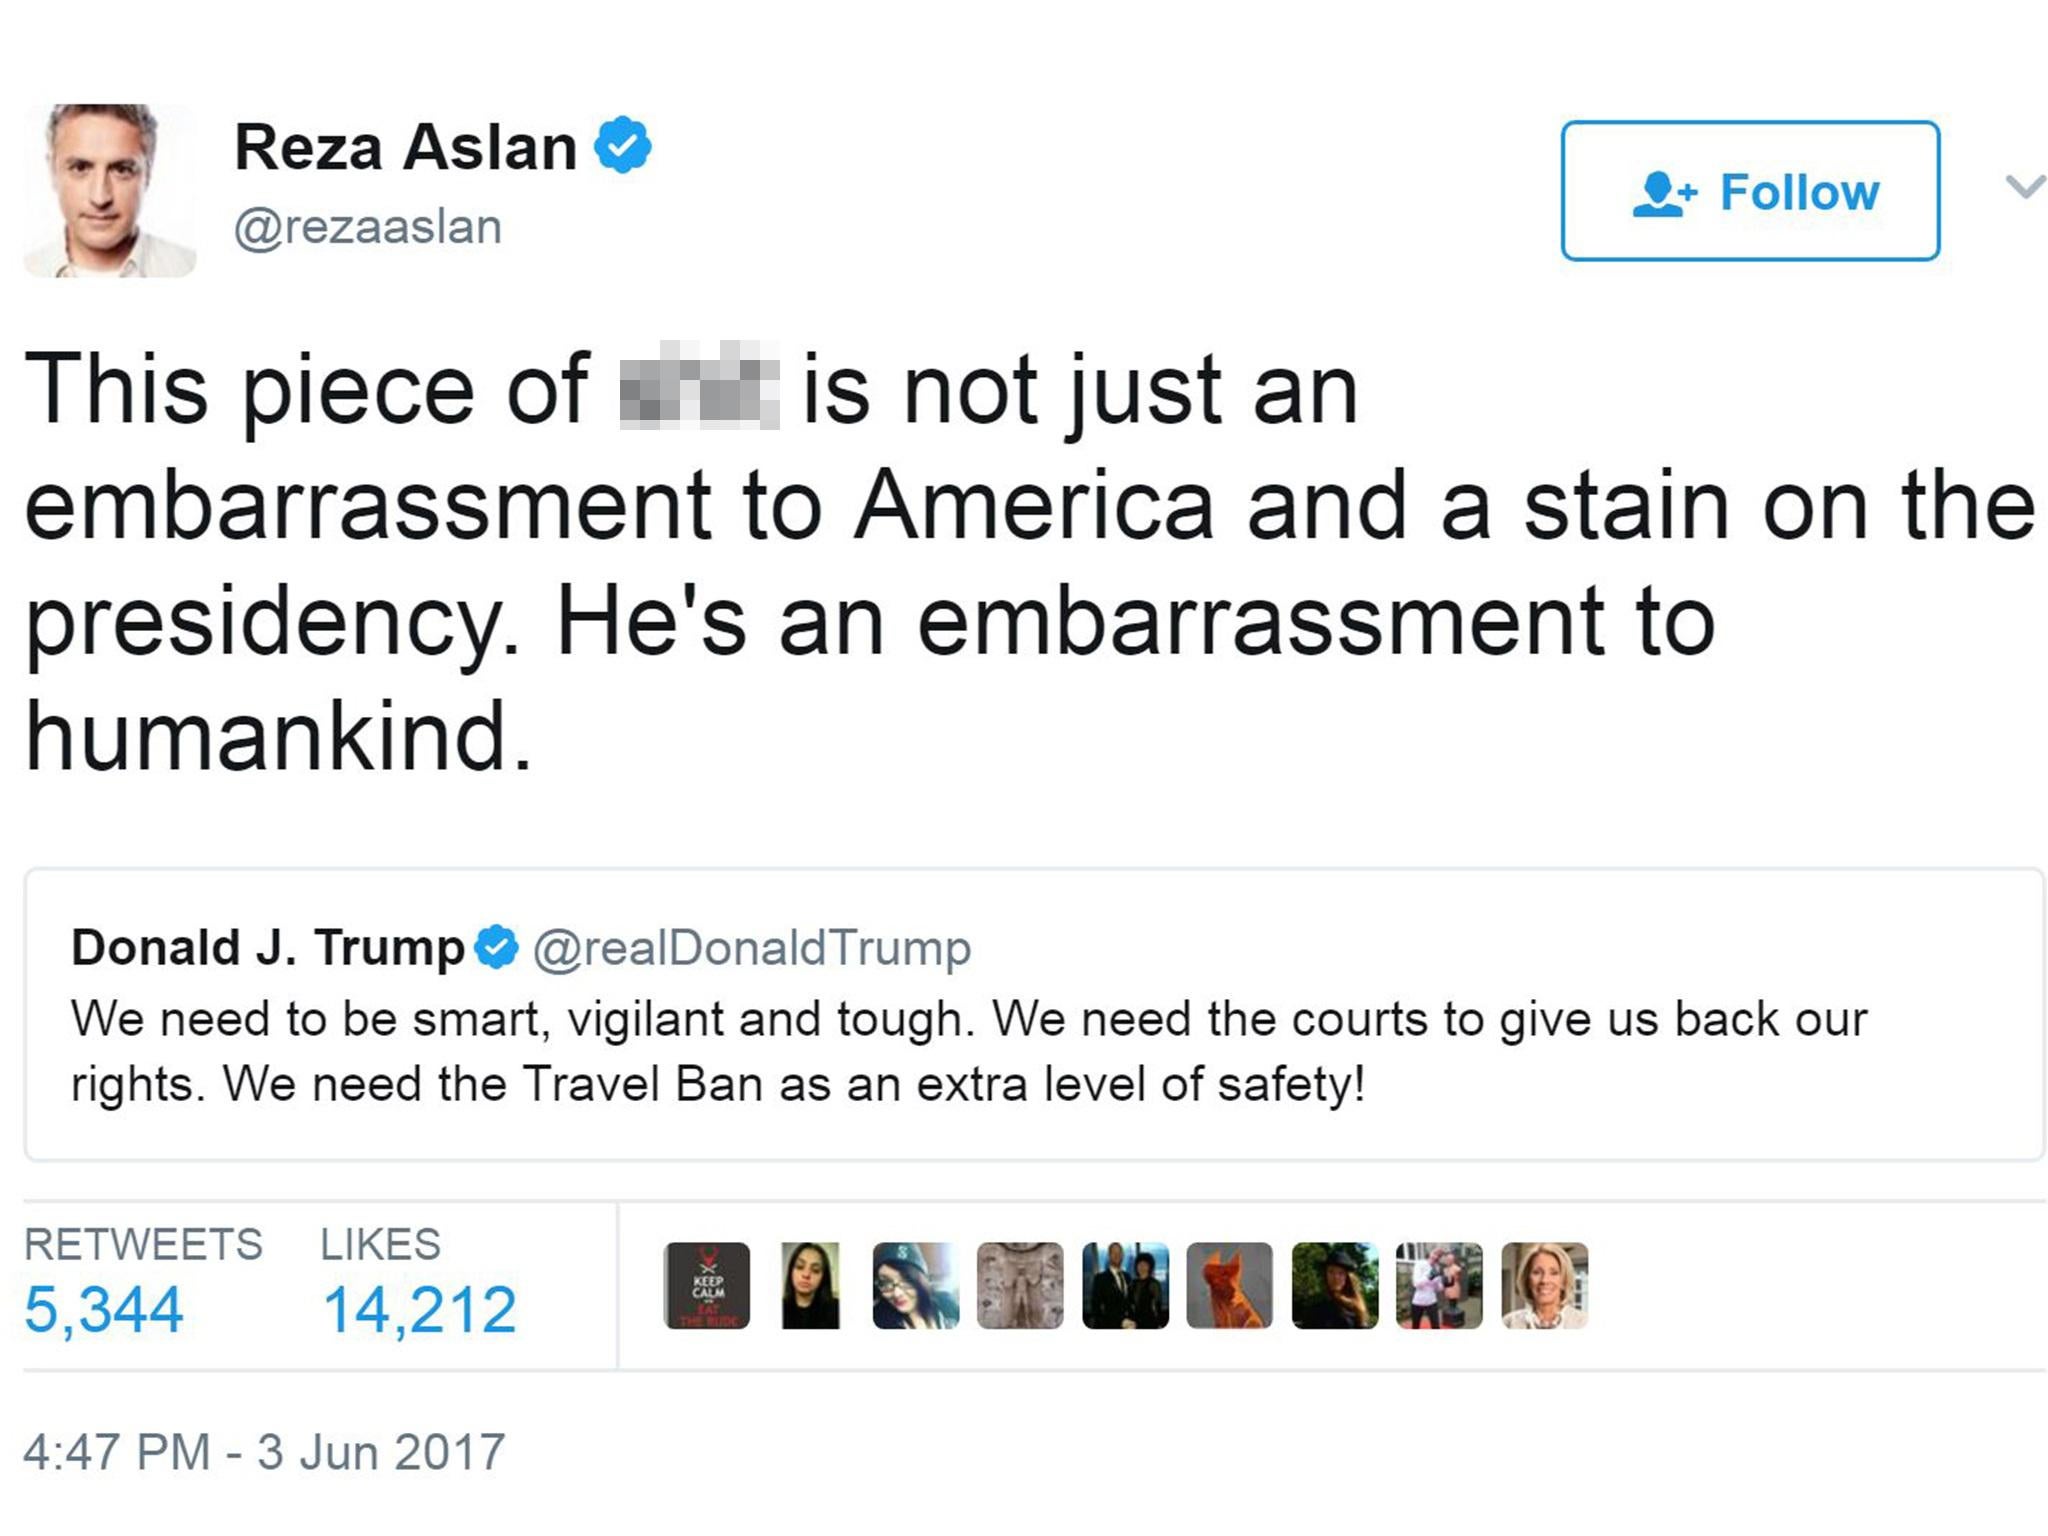 Reza Aslan's tweet calling Donald Trump a 'piece of s**t', which he has since deleted